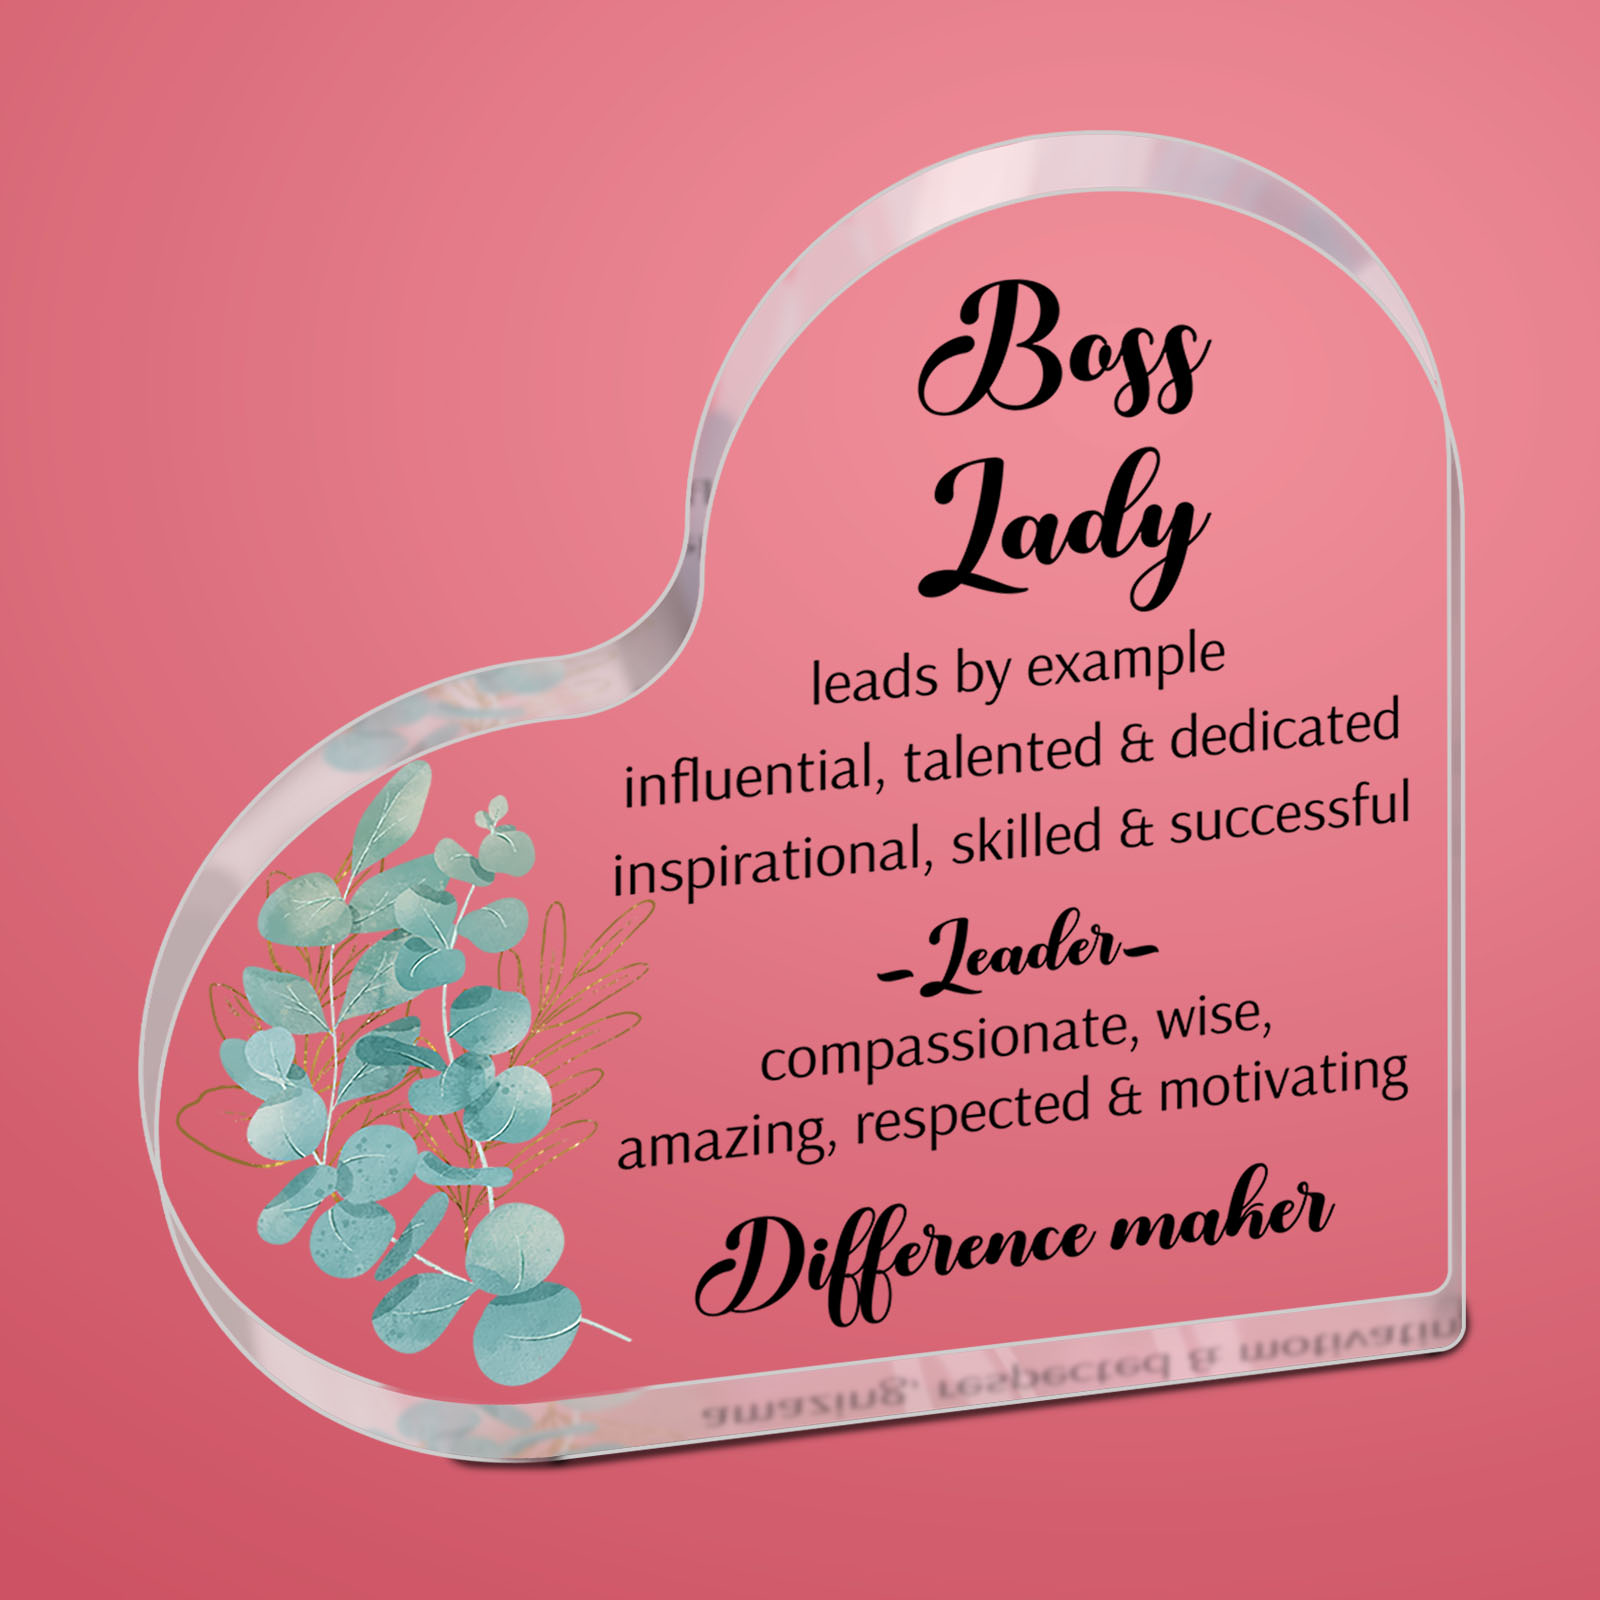 Boss Lady Gifts for Women with Wood Base 4.7 x 4.7'' Acrylic Boss Office  Desk Decor Promotion Gifts Best Boss Birthday Gifts Appreciation Gifts for